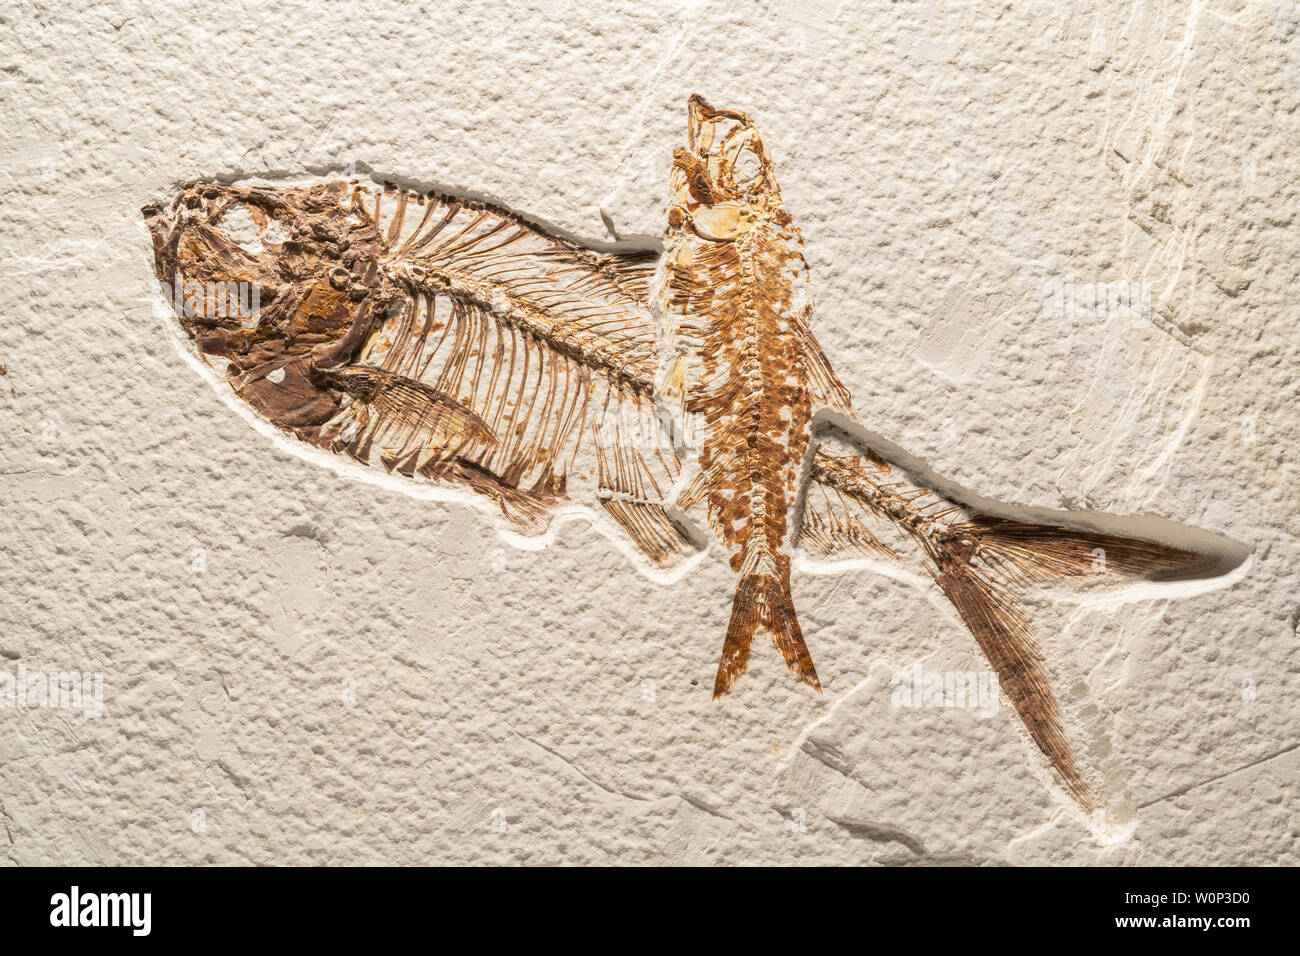 Diplomystus dentatus (larger fish) and Knightia eocaena. 48-55 million years old. Green River Formation, WY, USA, Eocene Epoch. Courtesy: Private coll Stock Photo